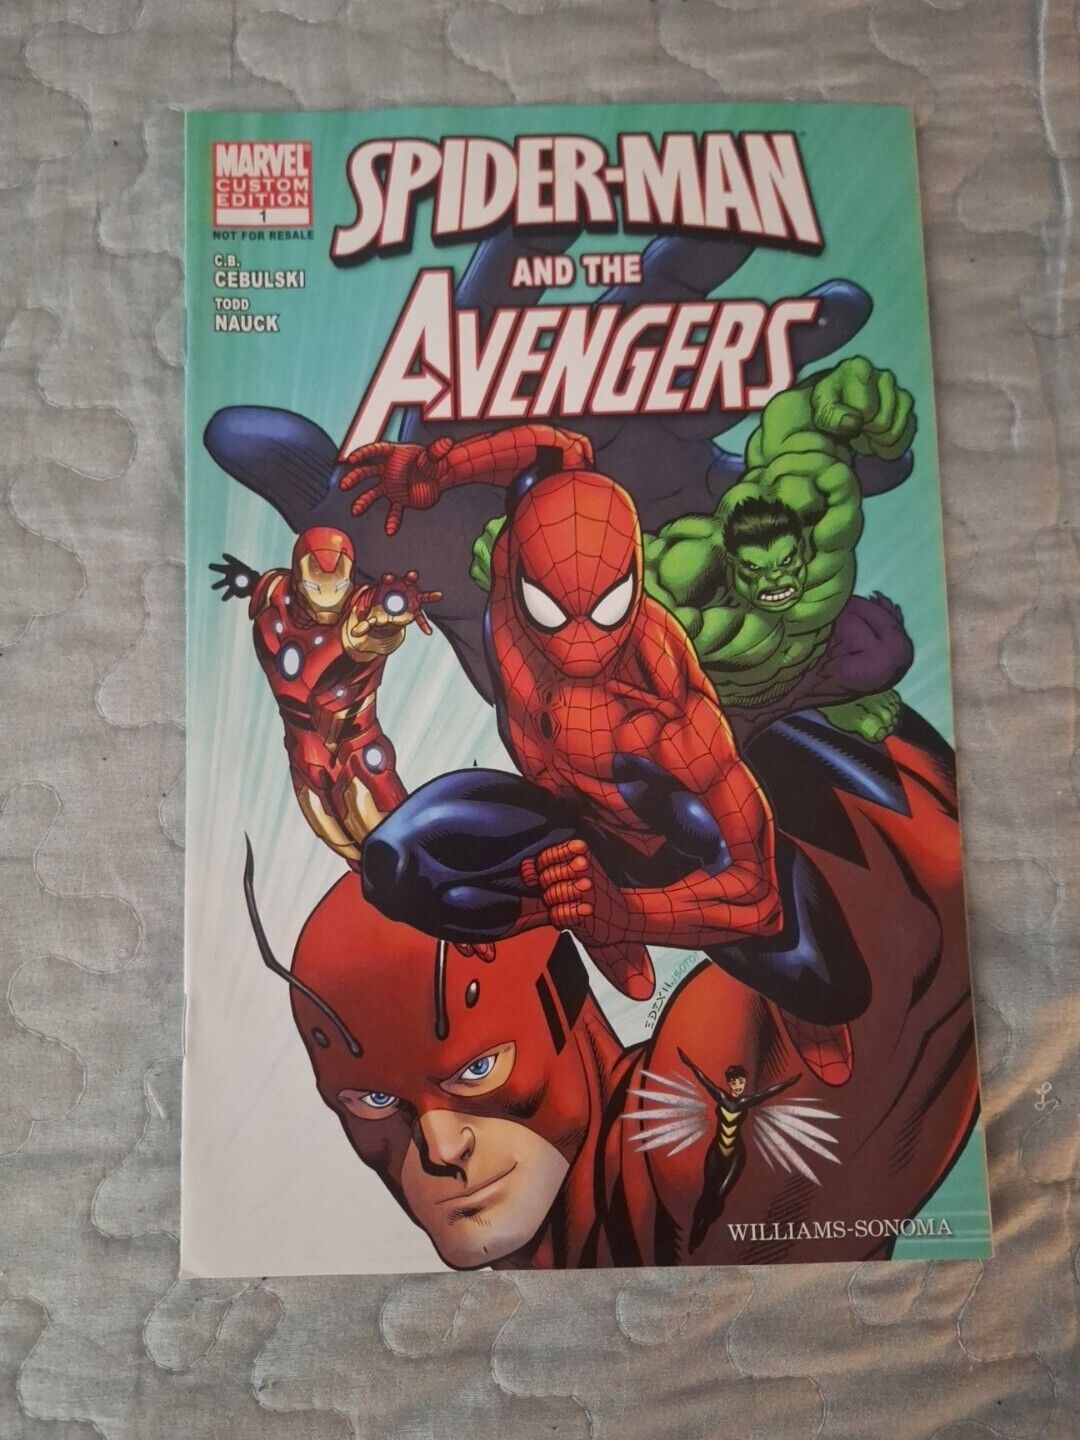 Spider-Man and The Avengers Issue #1